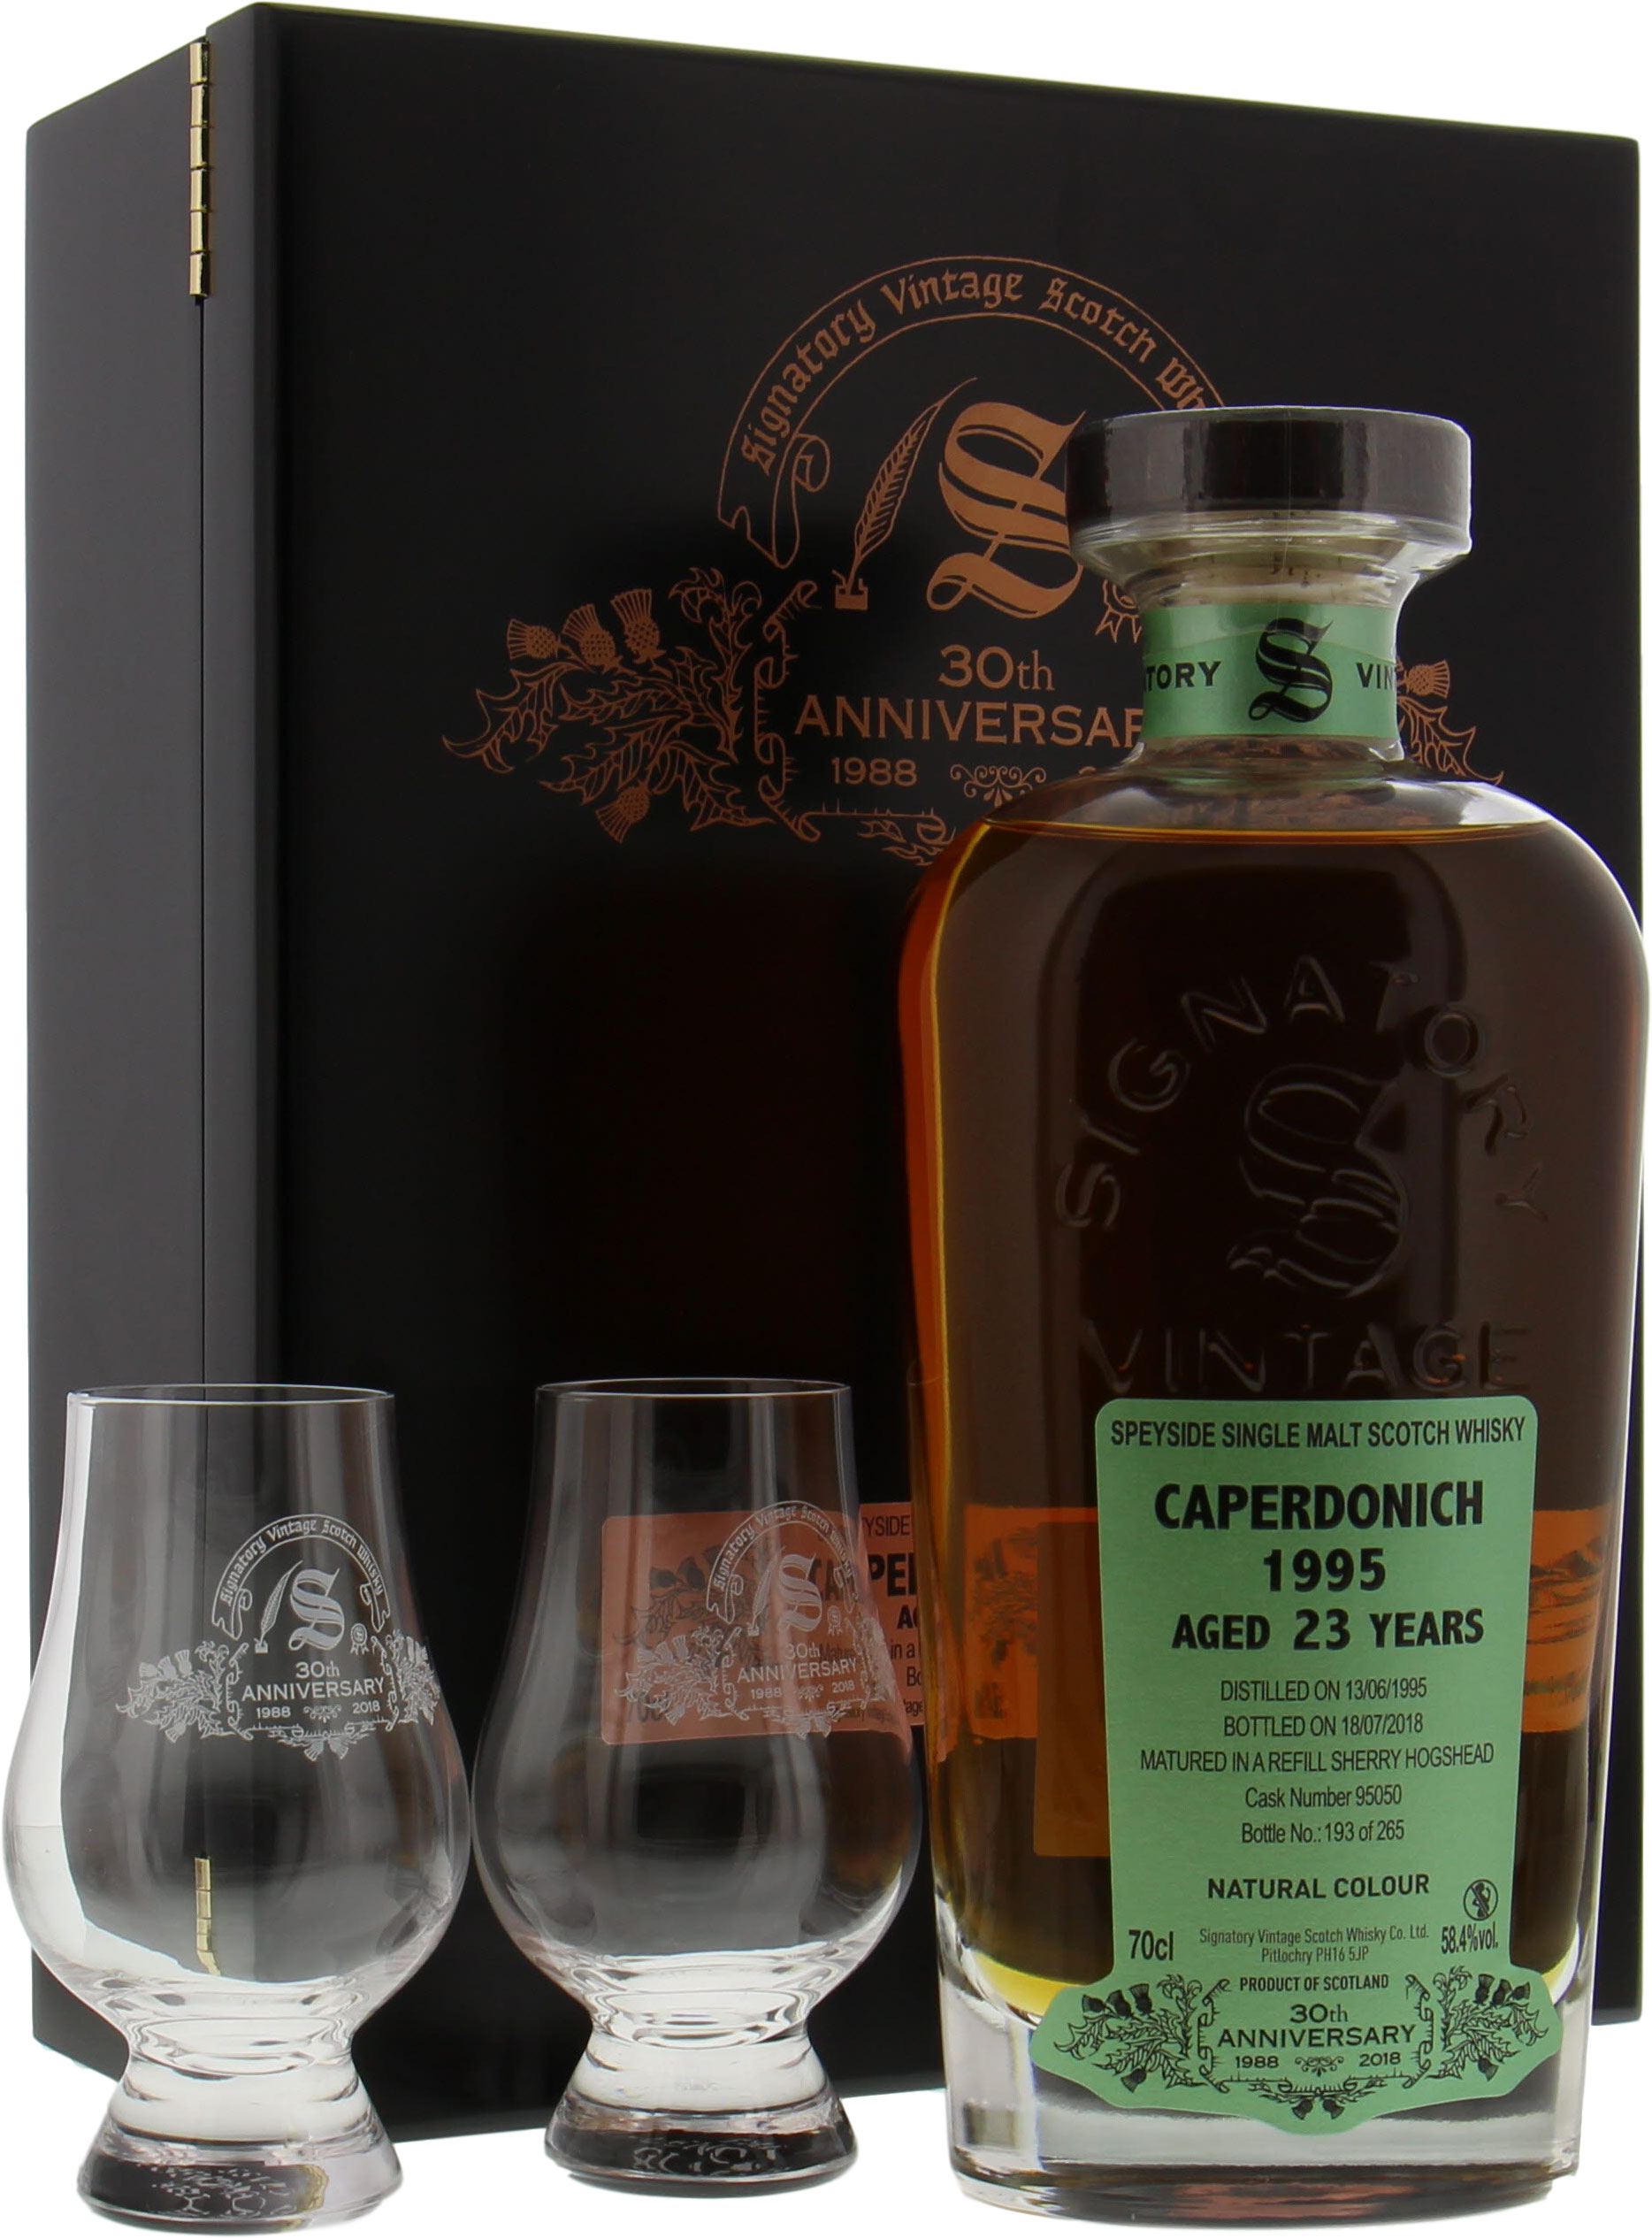 Caperdonich - 23 Years Old Signatory 30th Anniversary Cask 95050 58.4% 1995